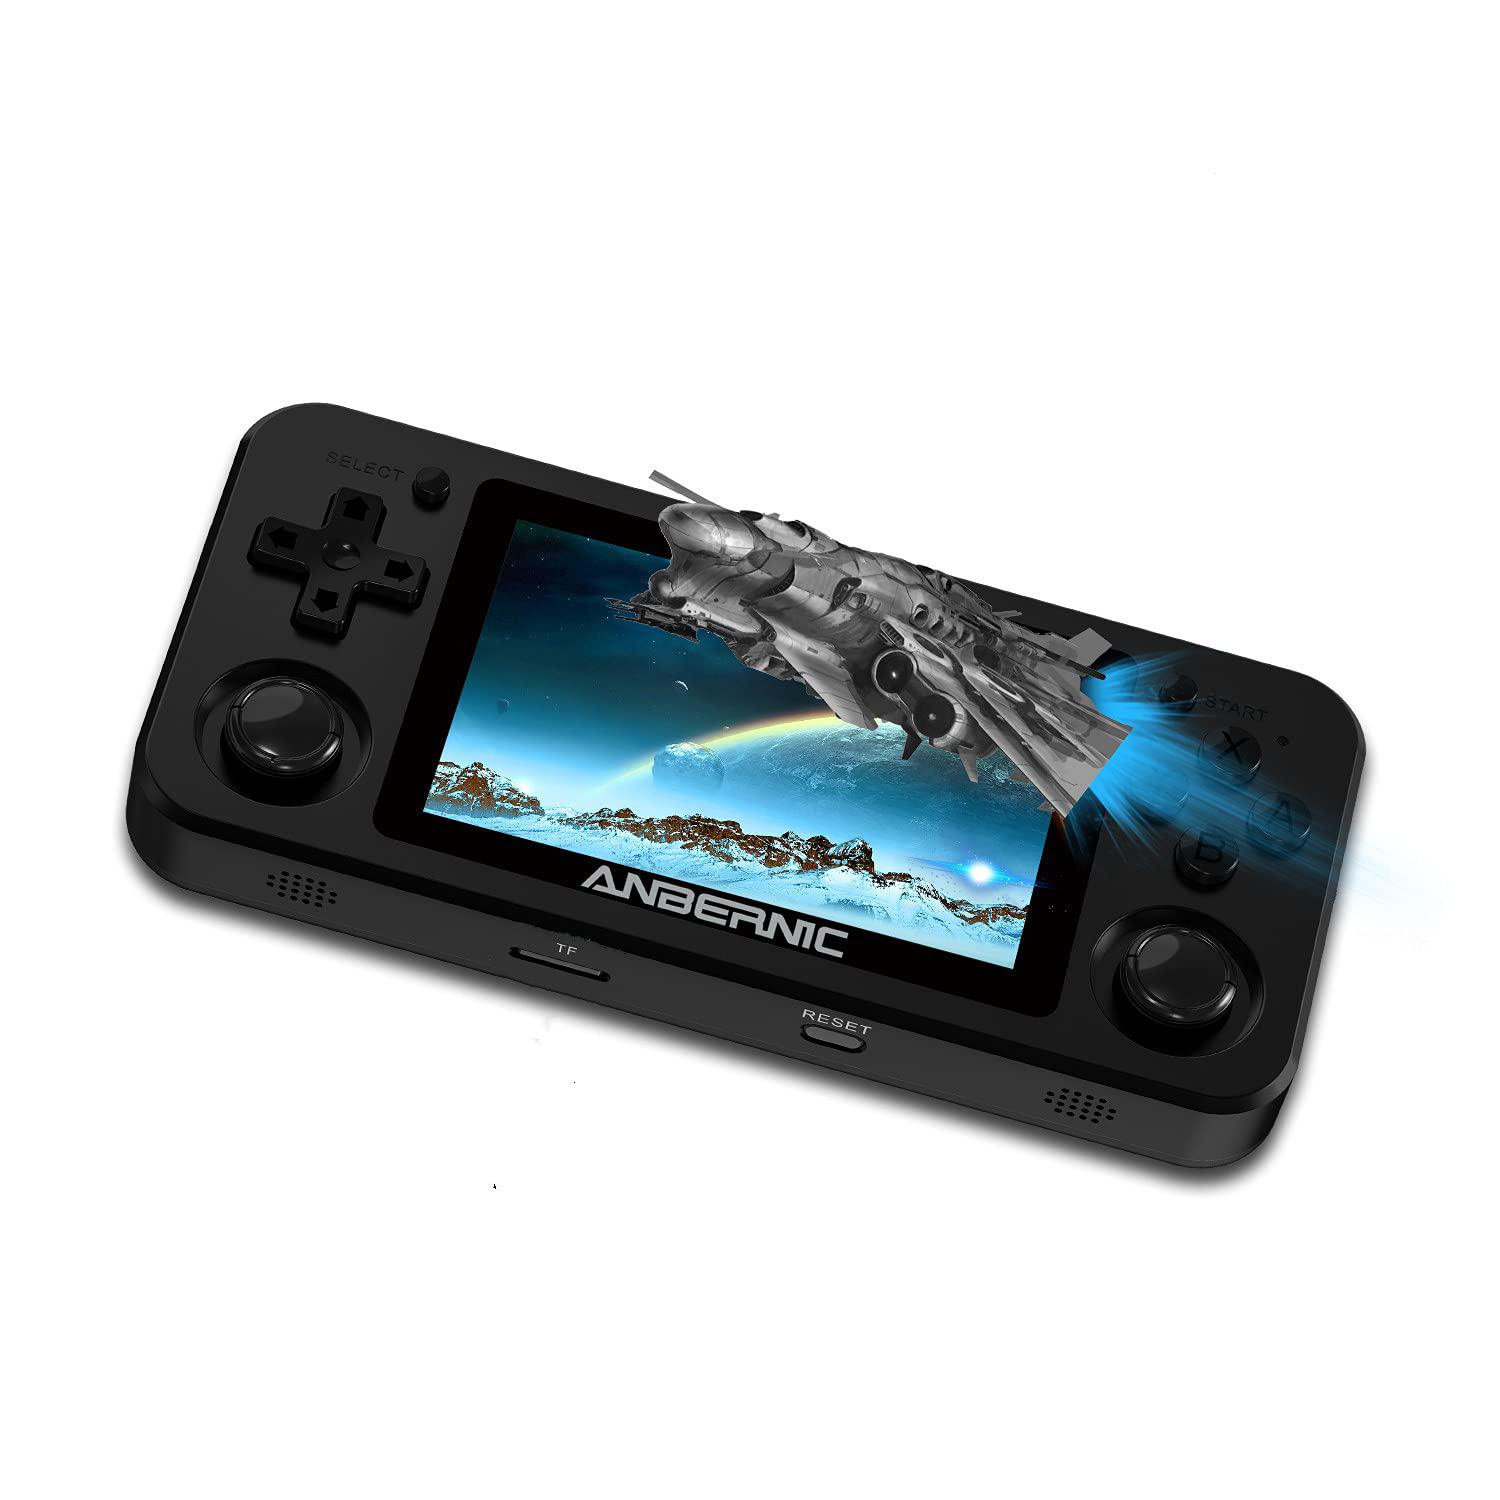 BAORUITENG Rg351M Handheld game console WiFi Function, Open Source System RK3326 chip 64g TF card 2500 classic games 35 Inch IPS Screen 350